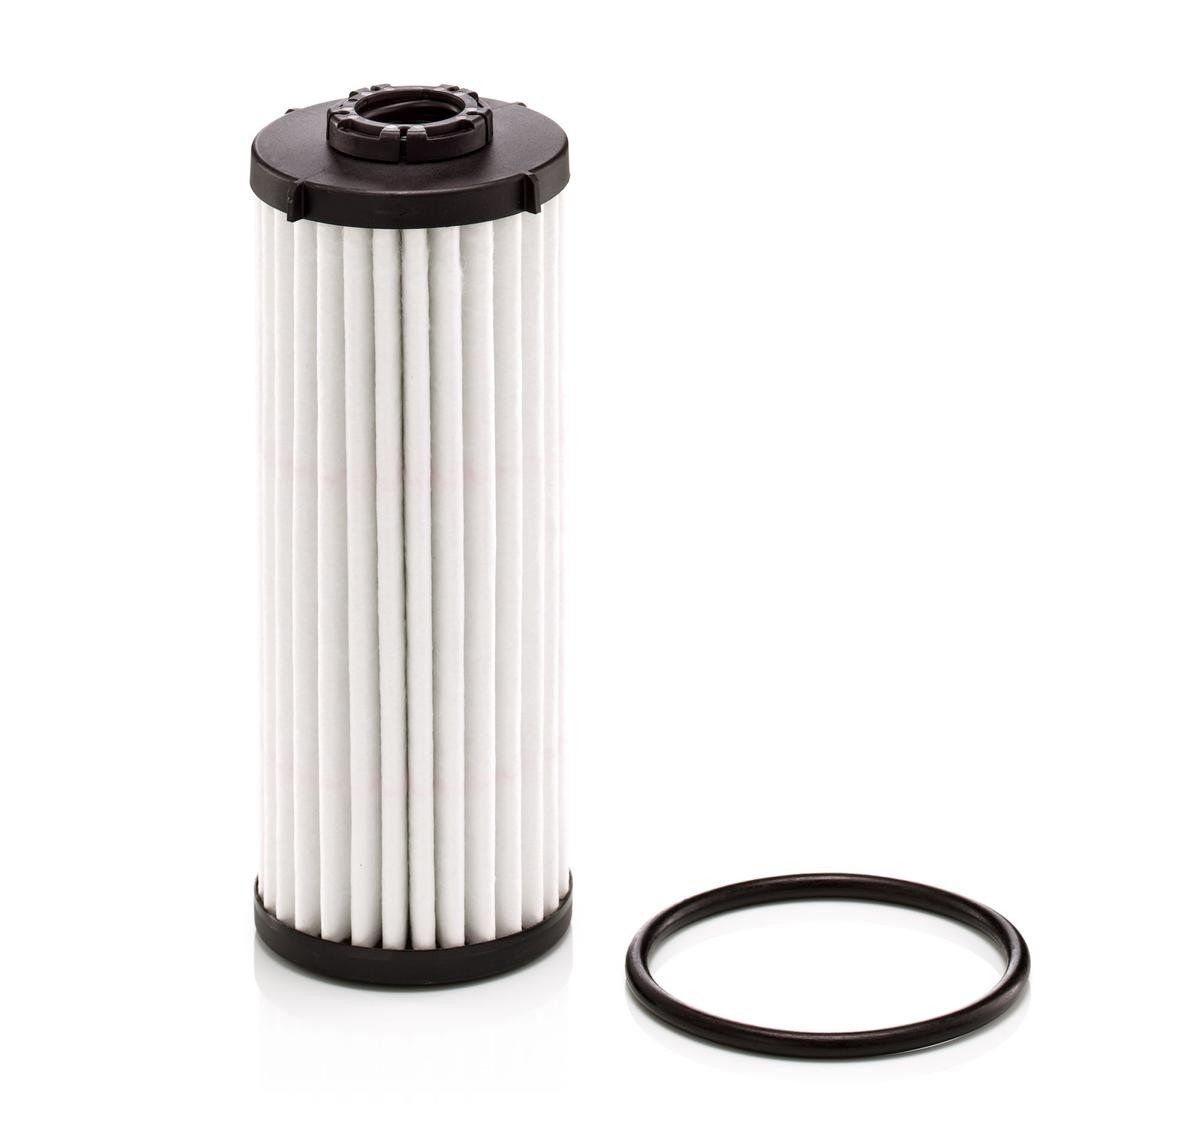 Seat TARRACO Transmission parts - Hydraulic Filter, automatic transmission MANN-FILTER H 6031 z